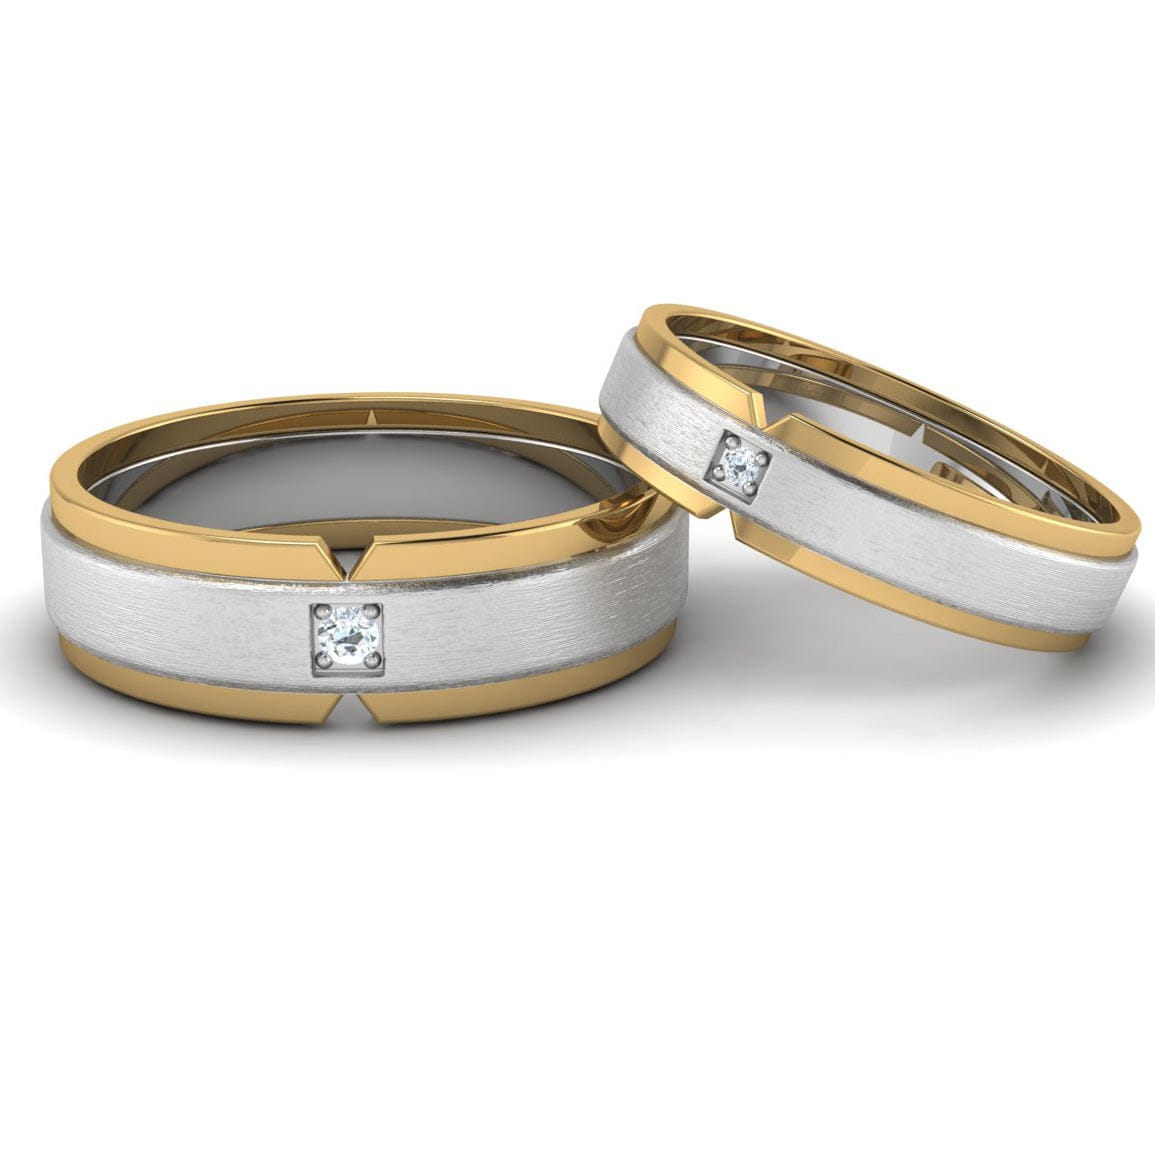 New Custom Personalized Couple's Ring, 316L Stainless Steel IP Gold or  silver - Unique Art World - Handcraft and Engraving service